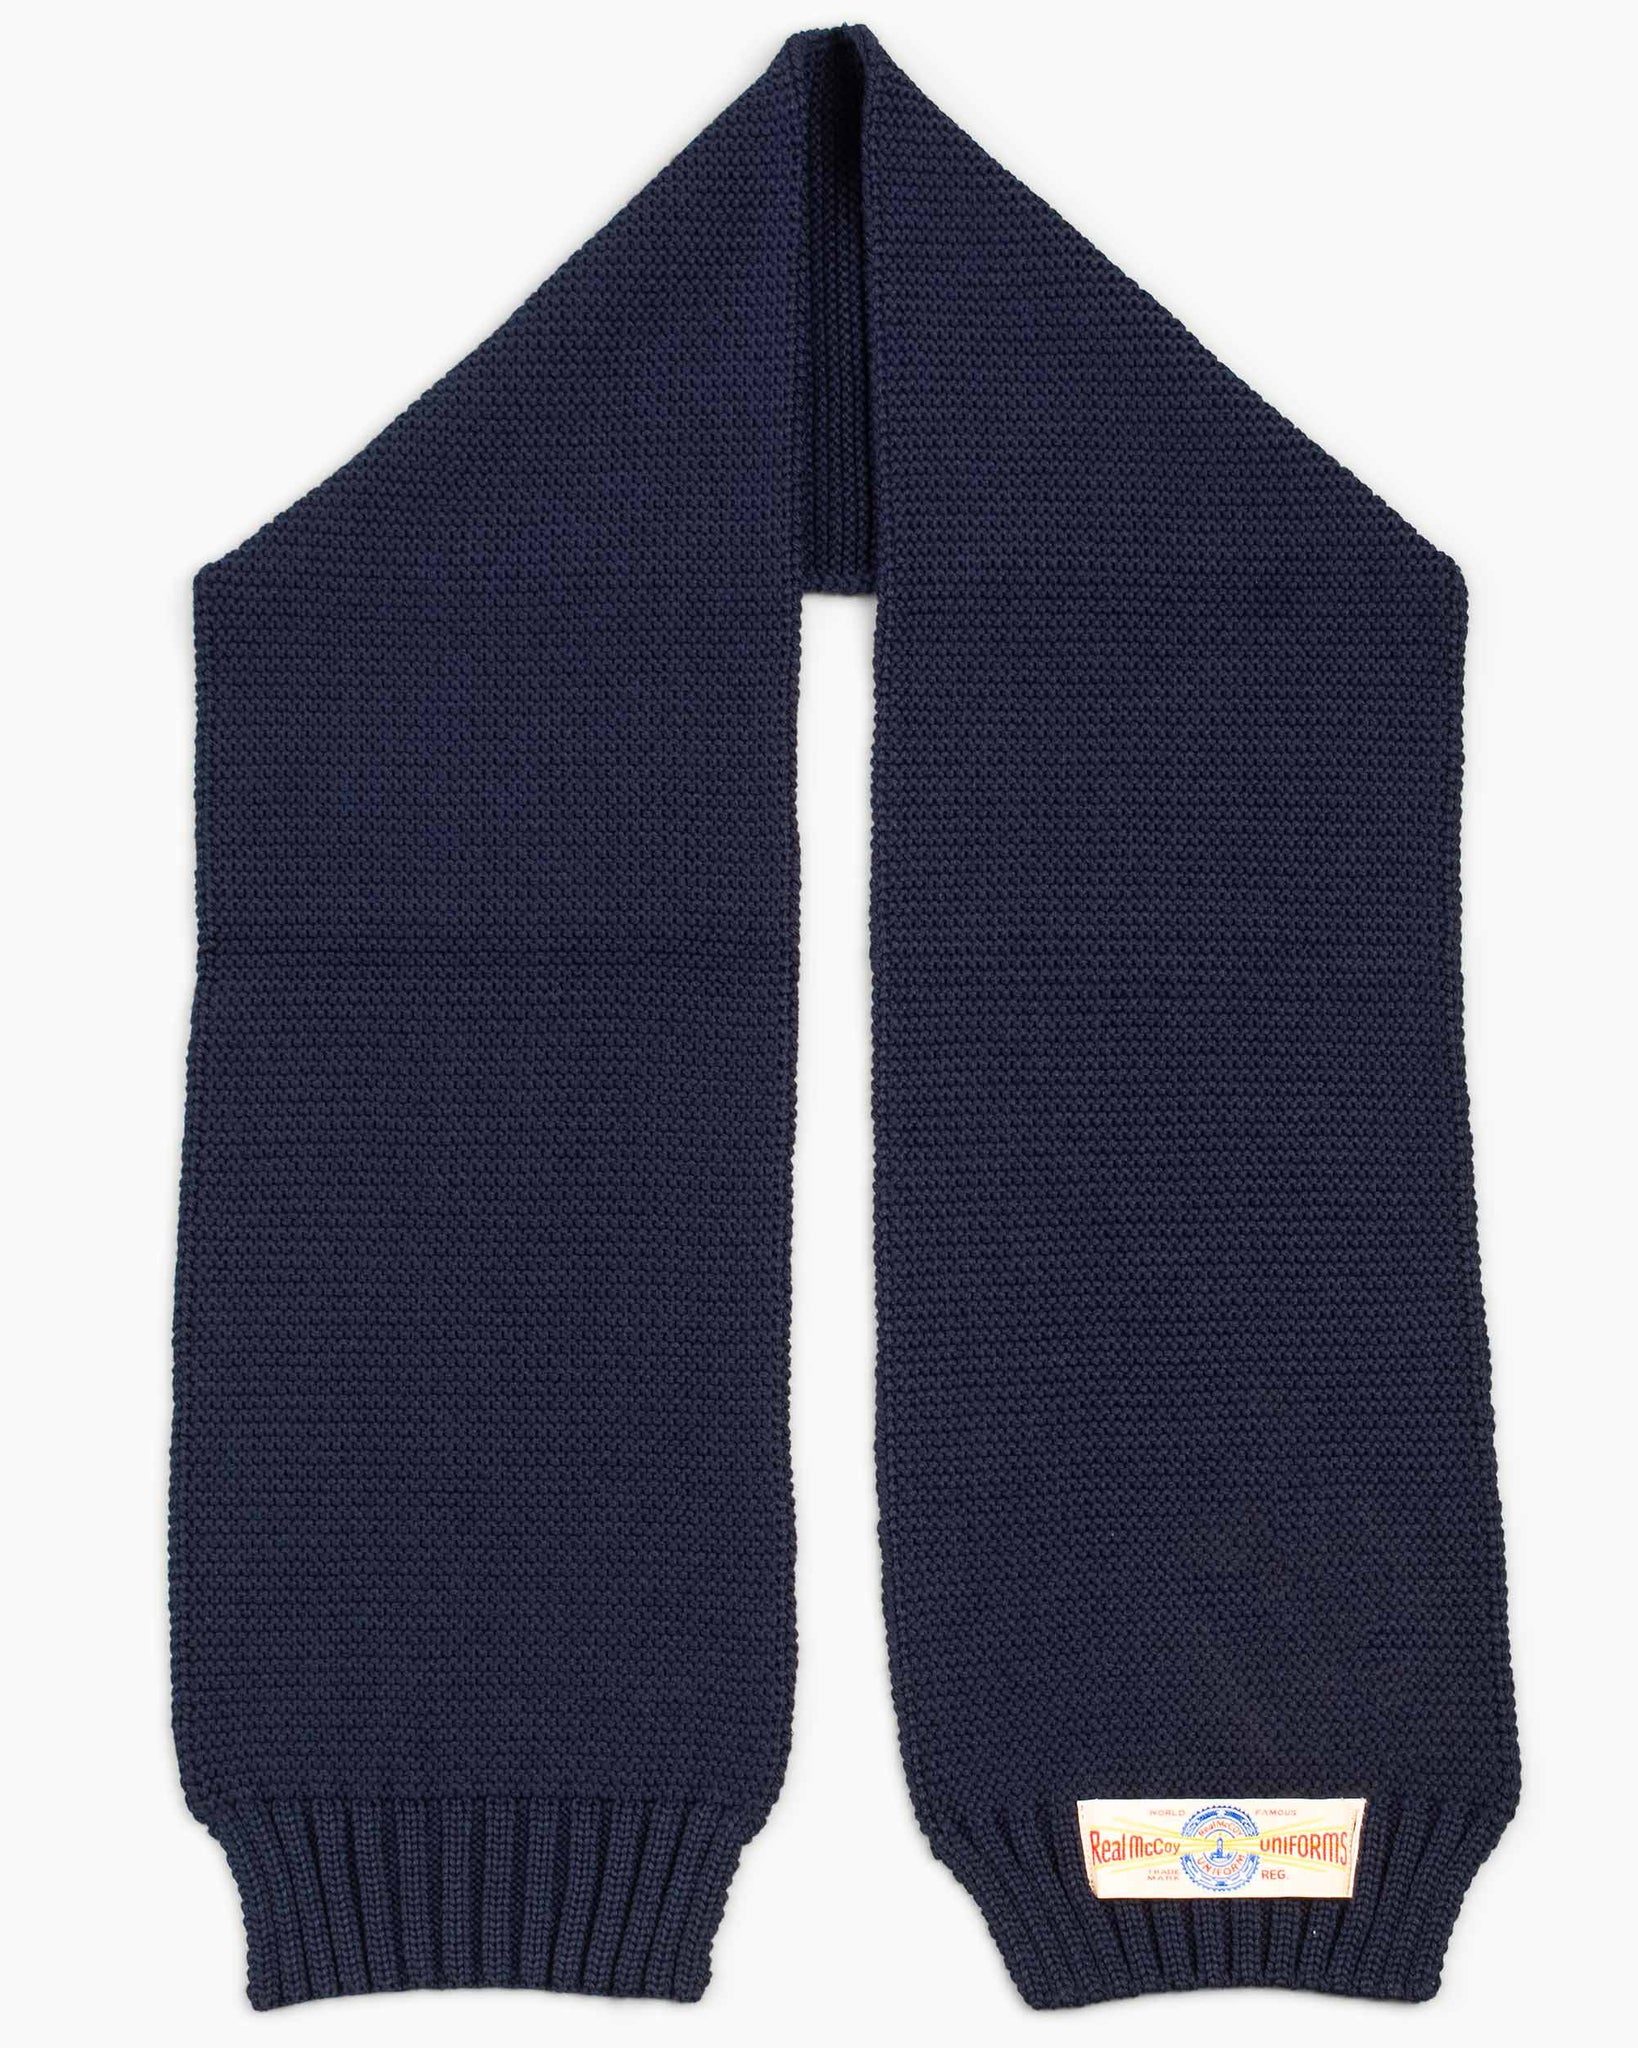 The Real McCoy's MA11101 Muffler, Wool-Knit Navy